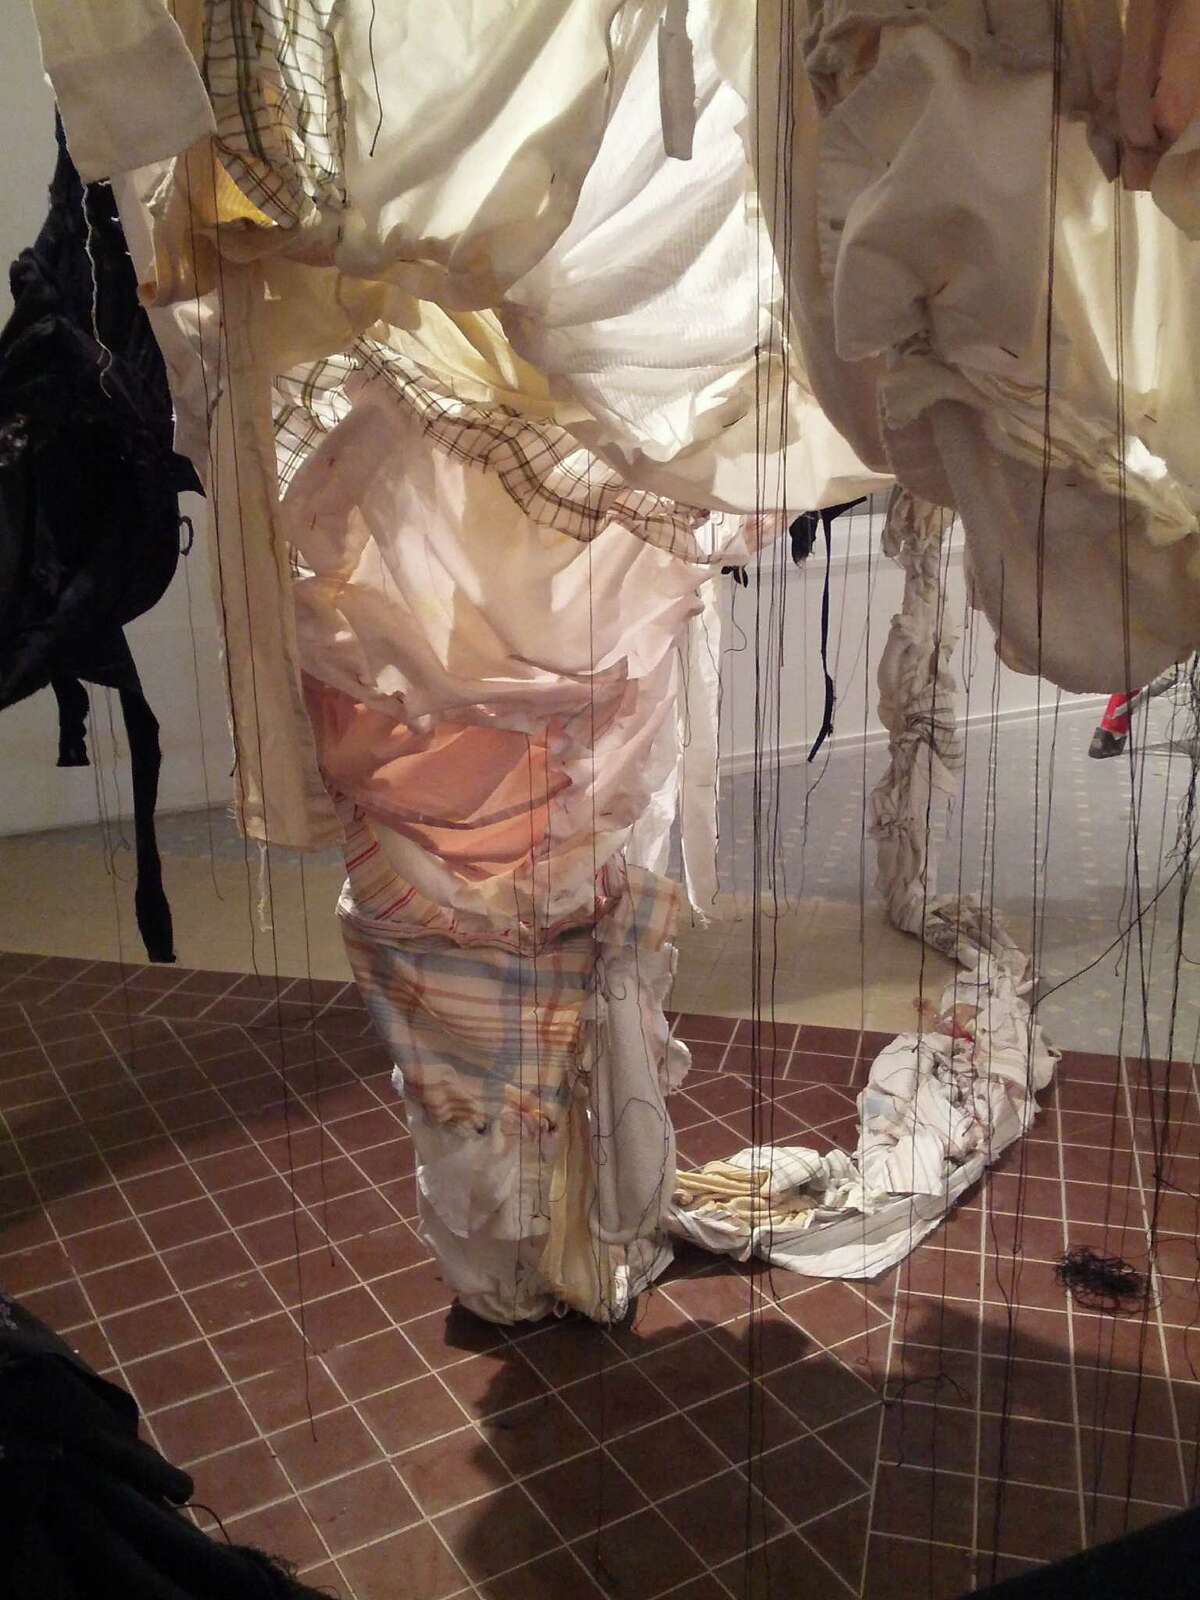 Clamp Light resident artist, Sarah T. Roberts, will transform the gallery space into a site-specific installation using women’s clothing that have been torn apart and sewn back together.